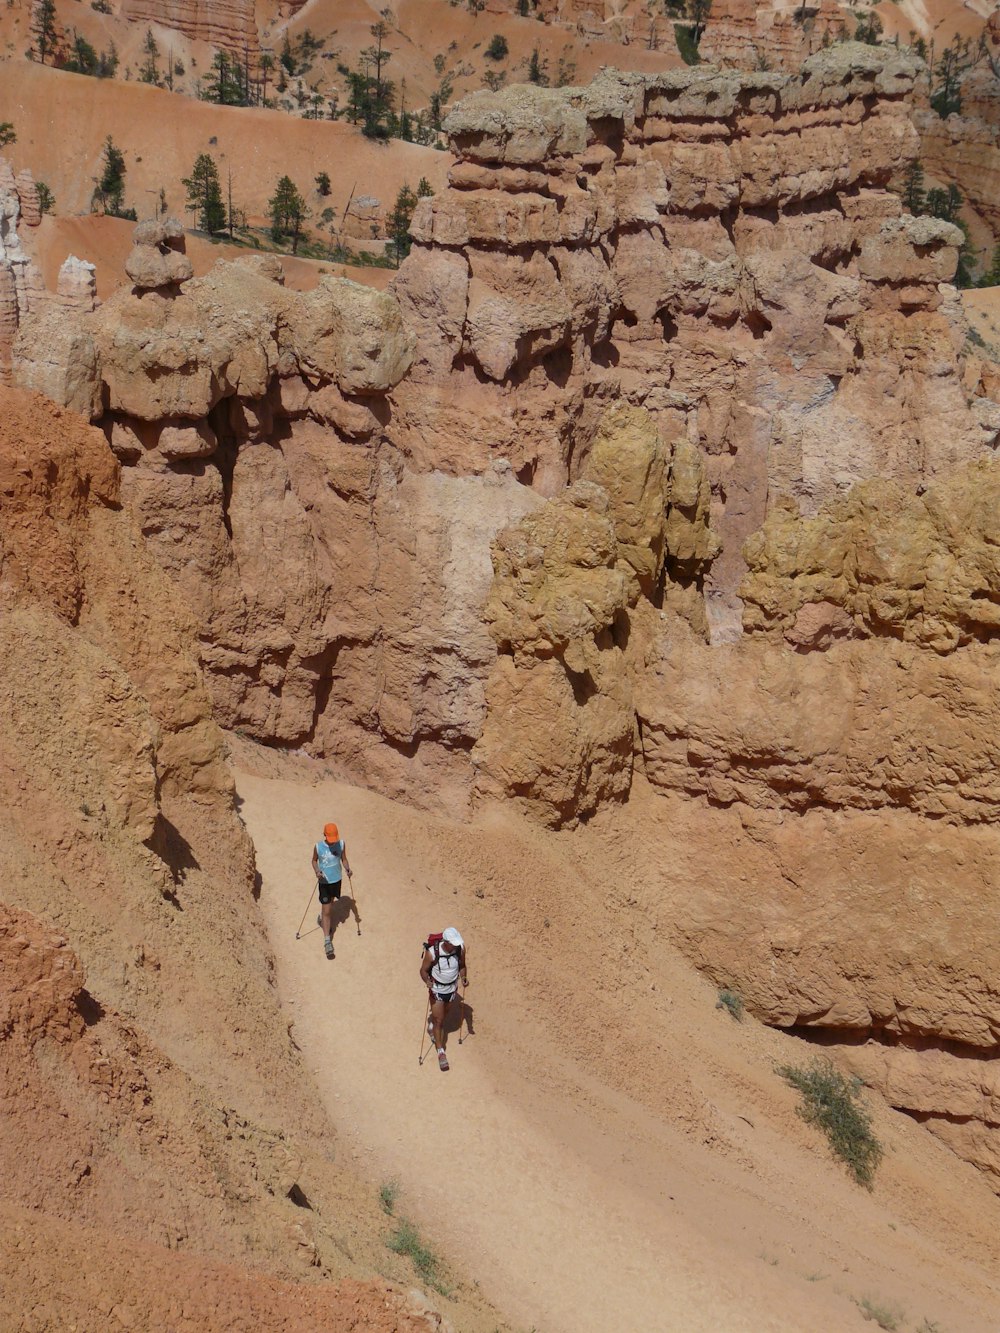 a group of people riding bikes down a dirt road